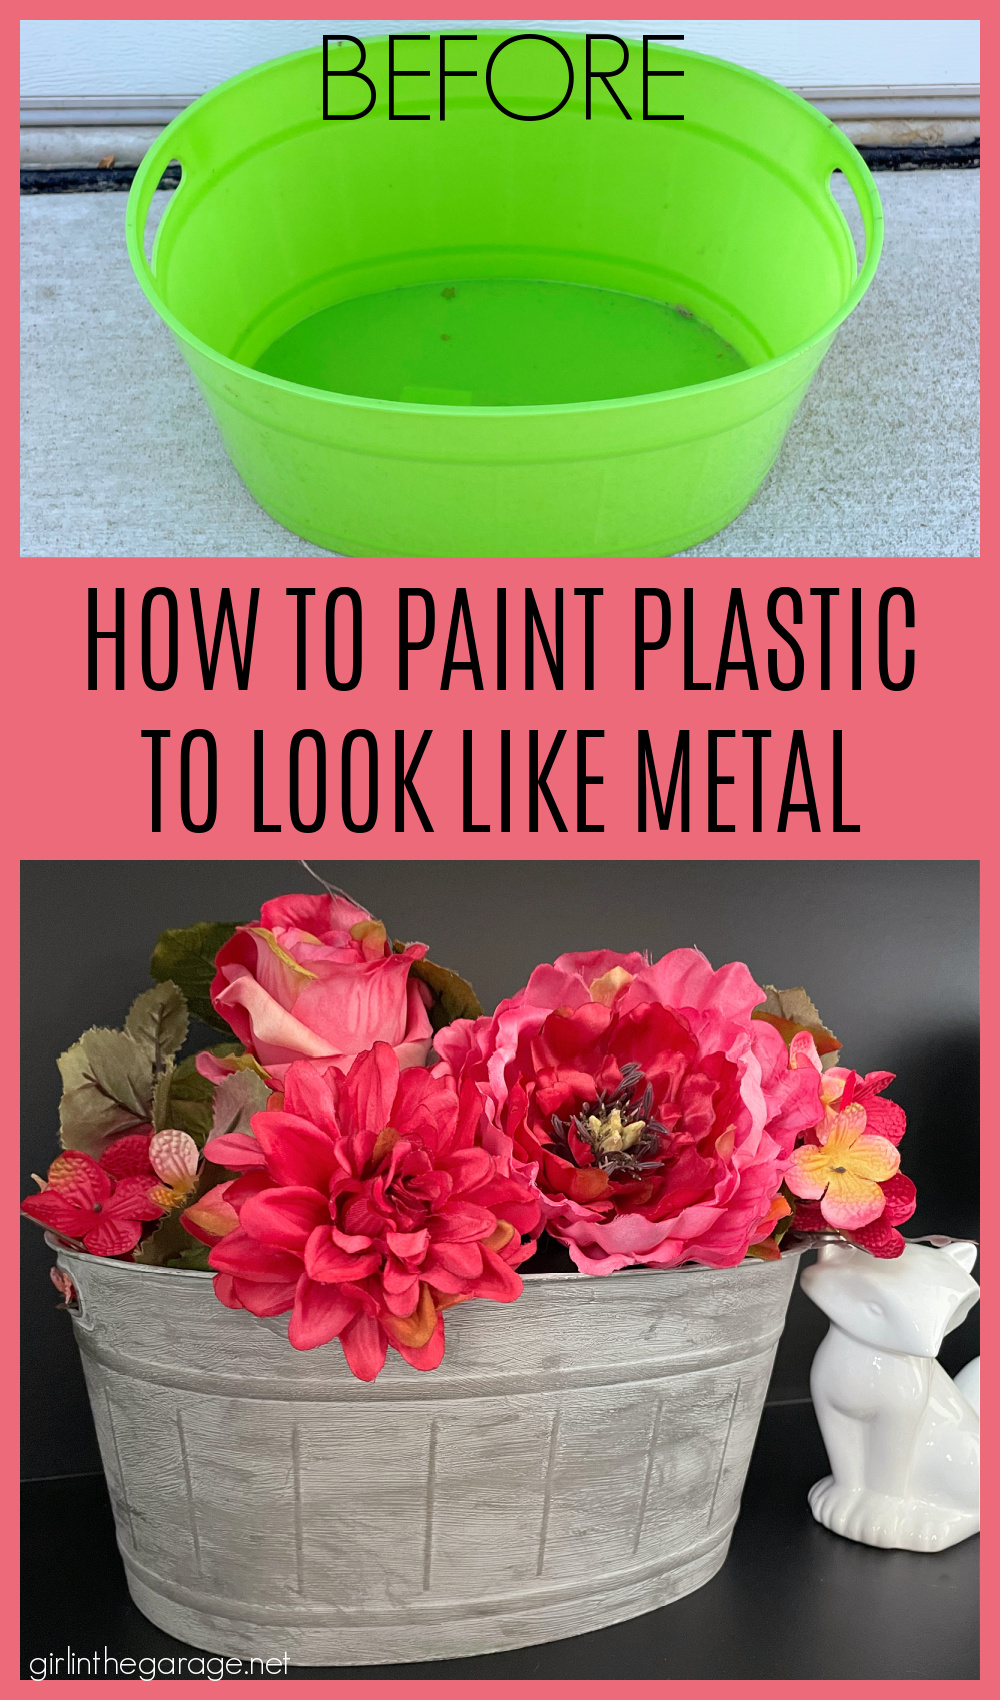 How to make plastic look like metal - Popular blog posts - Girl in the Garage